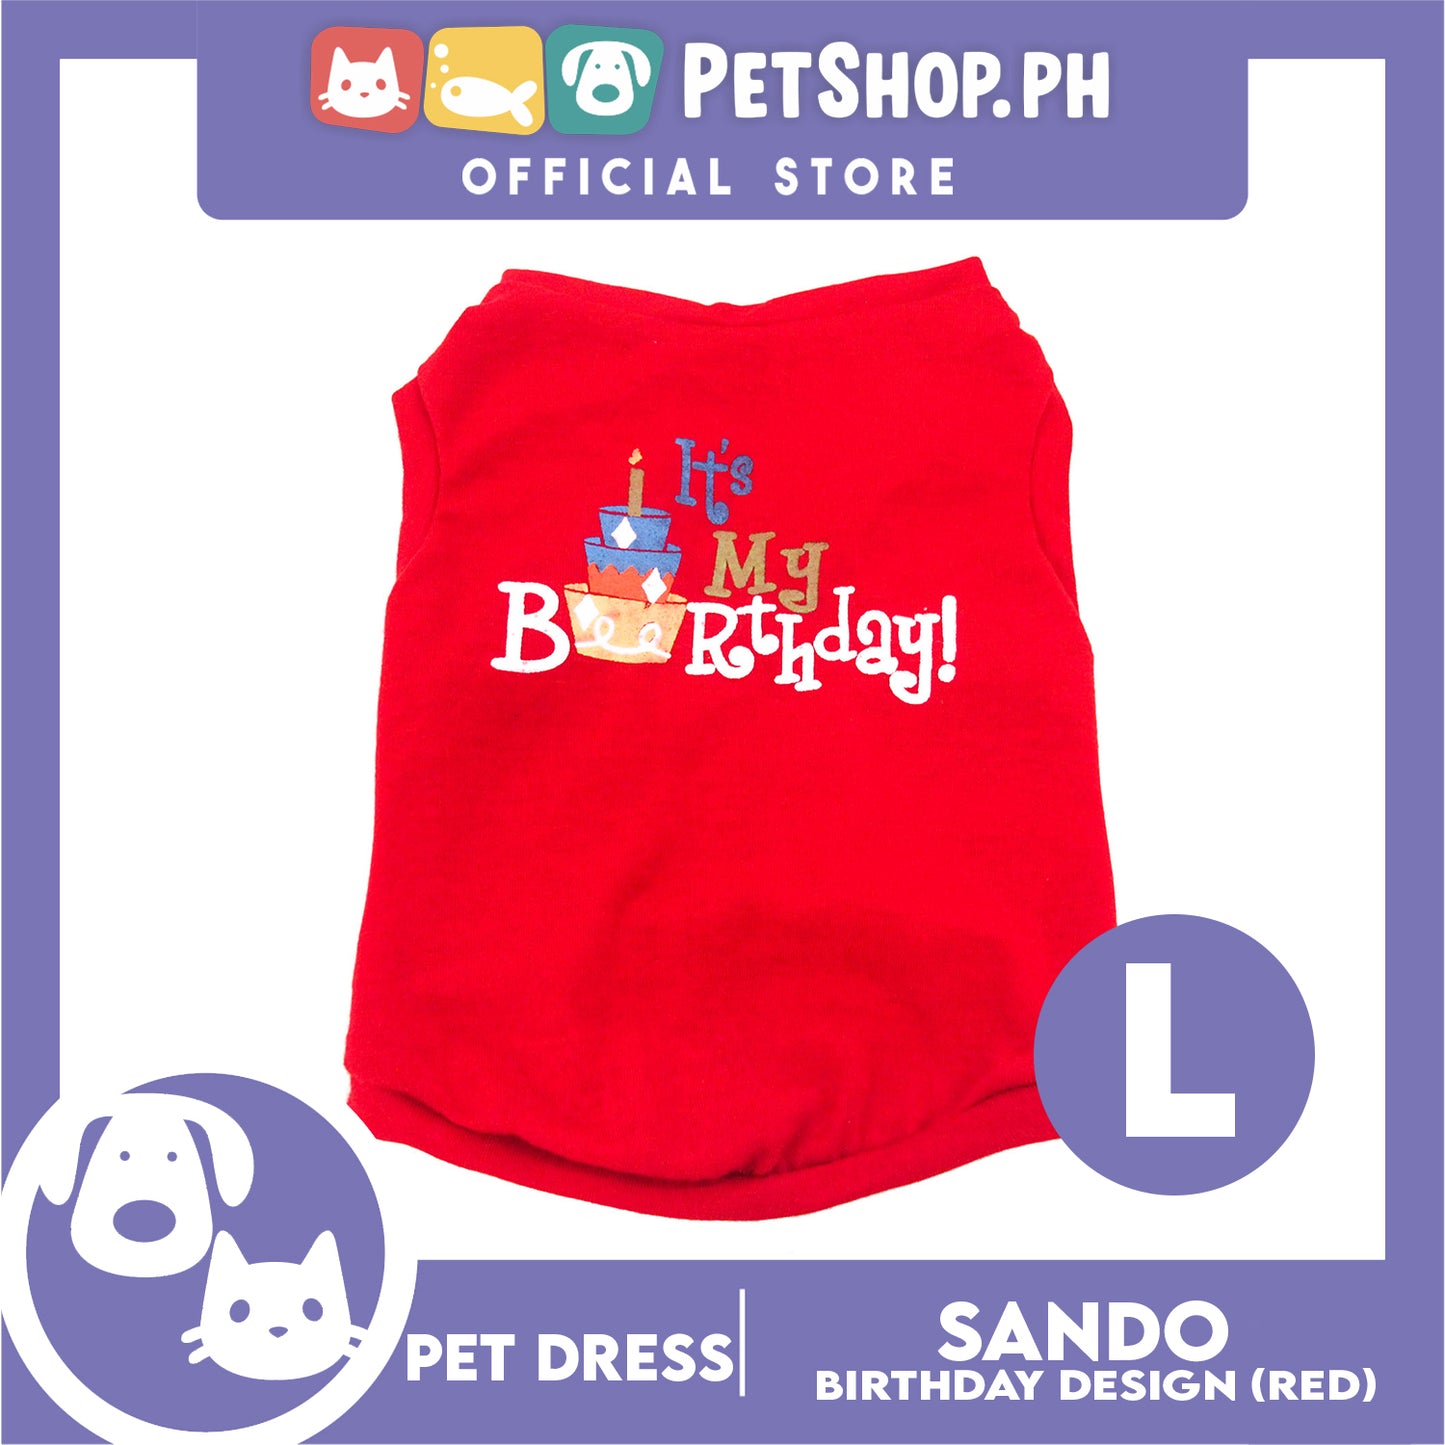 Pet Shirt Sleeveless (Large)  with It's My Birthday at Back for Puppy, Small Dog, & Cat- Sando Breathable Clothes, Pet T-shirt, Dog Sando